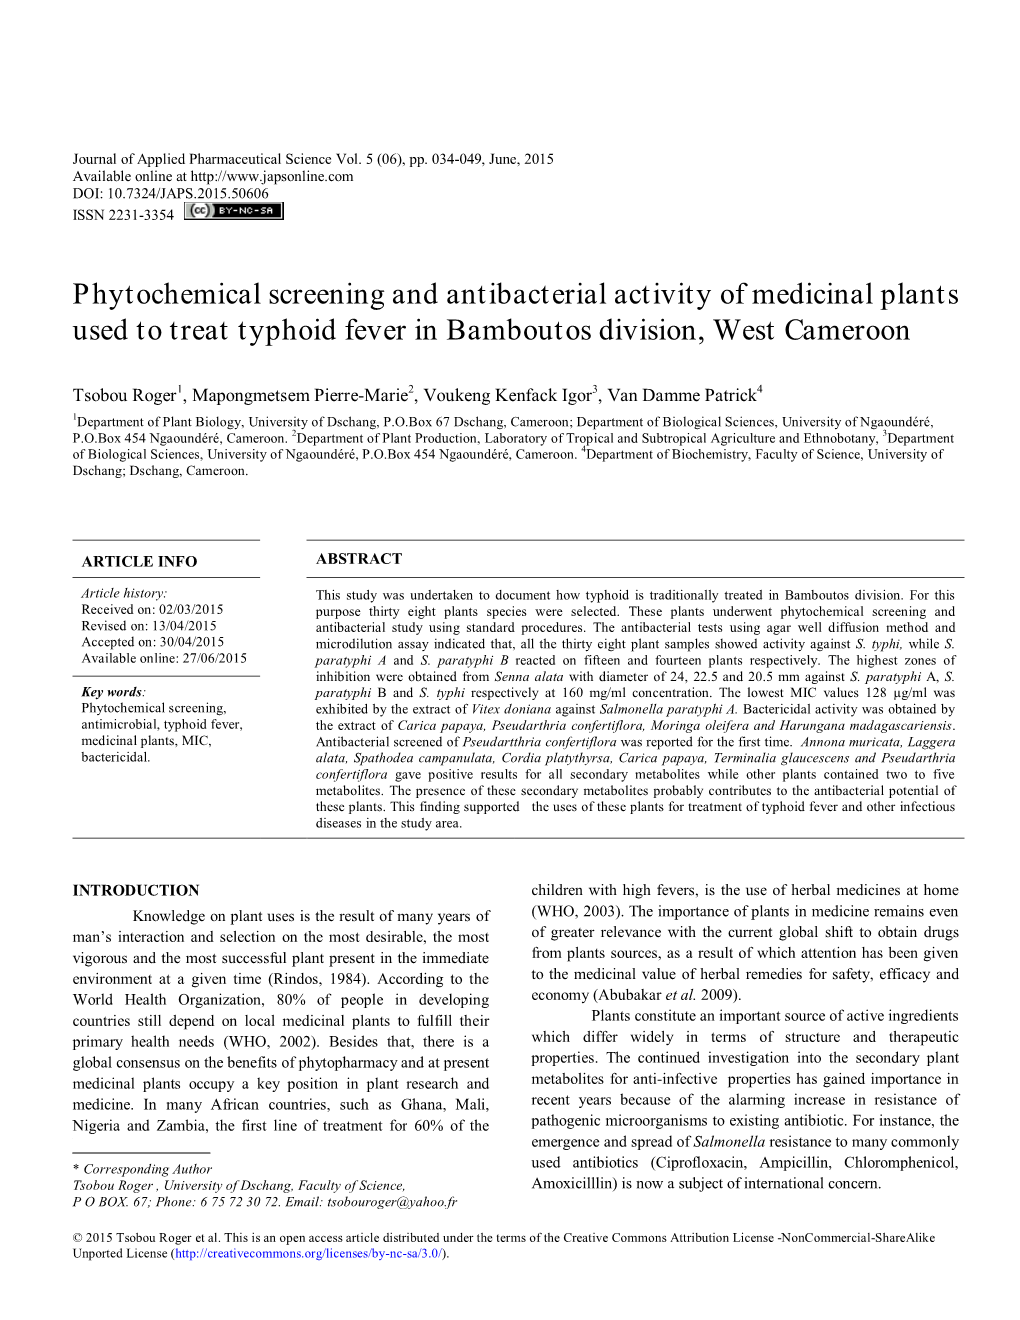 Phytochemical Screening and Antibacterial Activity of Medicinal Plants Used to Treat Typhoid Fever in Bamboutos Division, West Cameroon